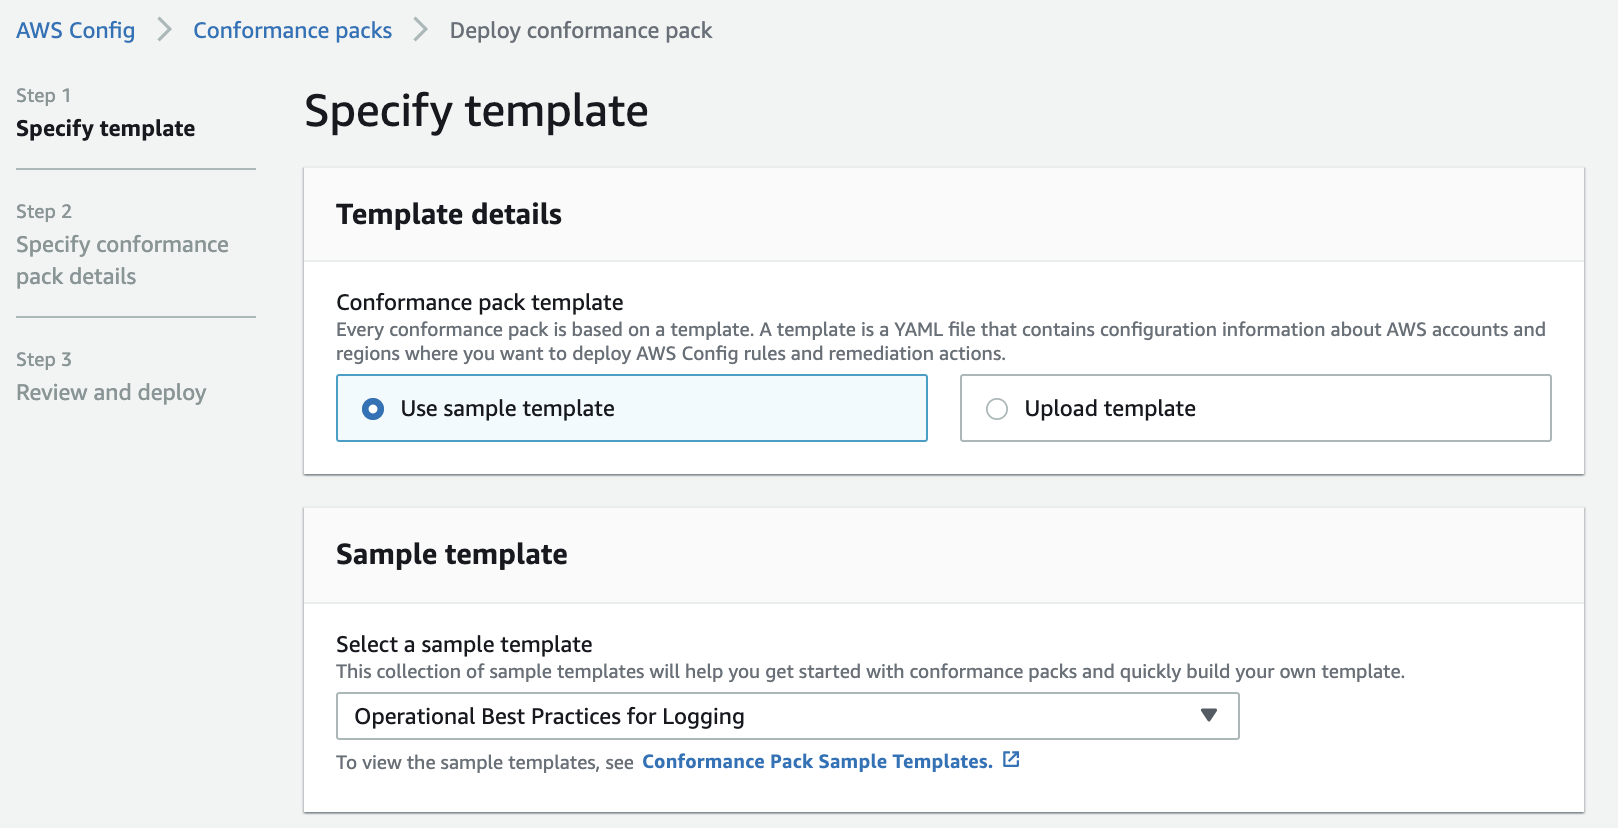 AWS Config Conformance packs Deploy conformance pack

Step 1 H
specify template Specify template
Step 2 Template details

Specify conformance

pack details
Conformance pack template

Every conformance pack is based on a template. A template is a YAML file that contains configuration information about AWS accounts and
Step 3 regions where you want to deploy AWS Config rules and remediation actions.

Review and deploy © Use sample template Upload template

Sample template

Select a sample template
This collection of sample templates will help you get started with conformance packs and quickly build your own template.

Operational Best Practices for Logging v

To view the sample templates, see Conformance Pack Sample Templates. 4